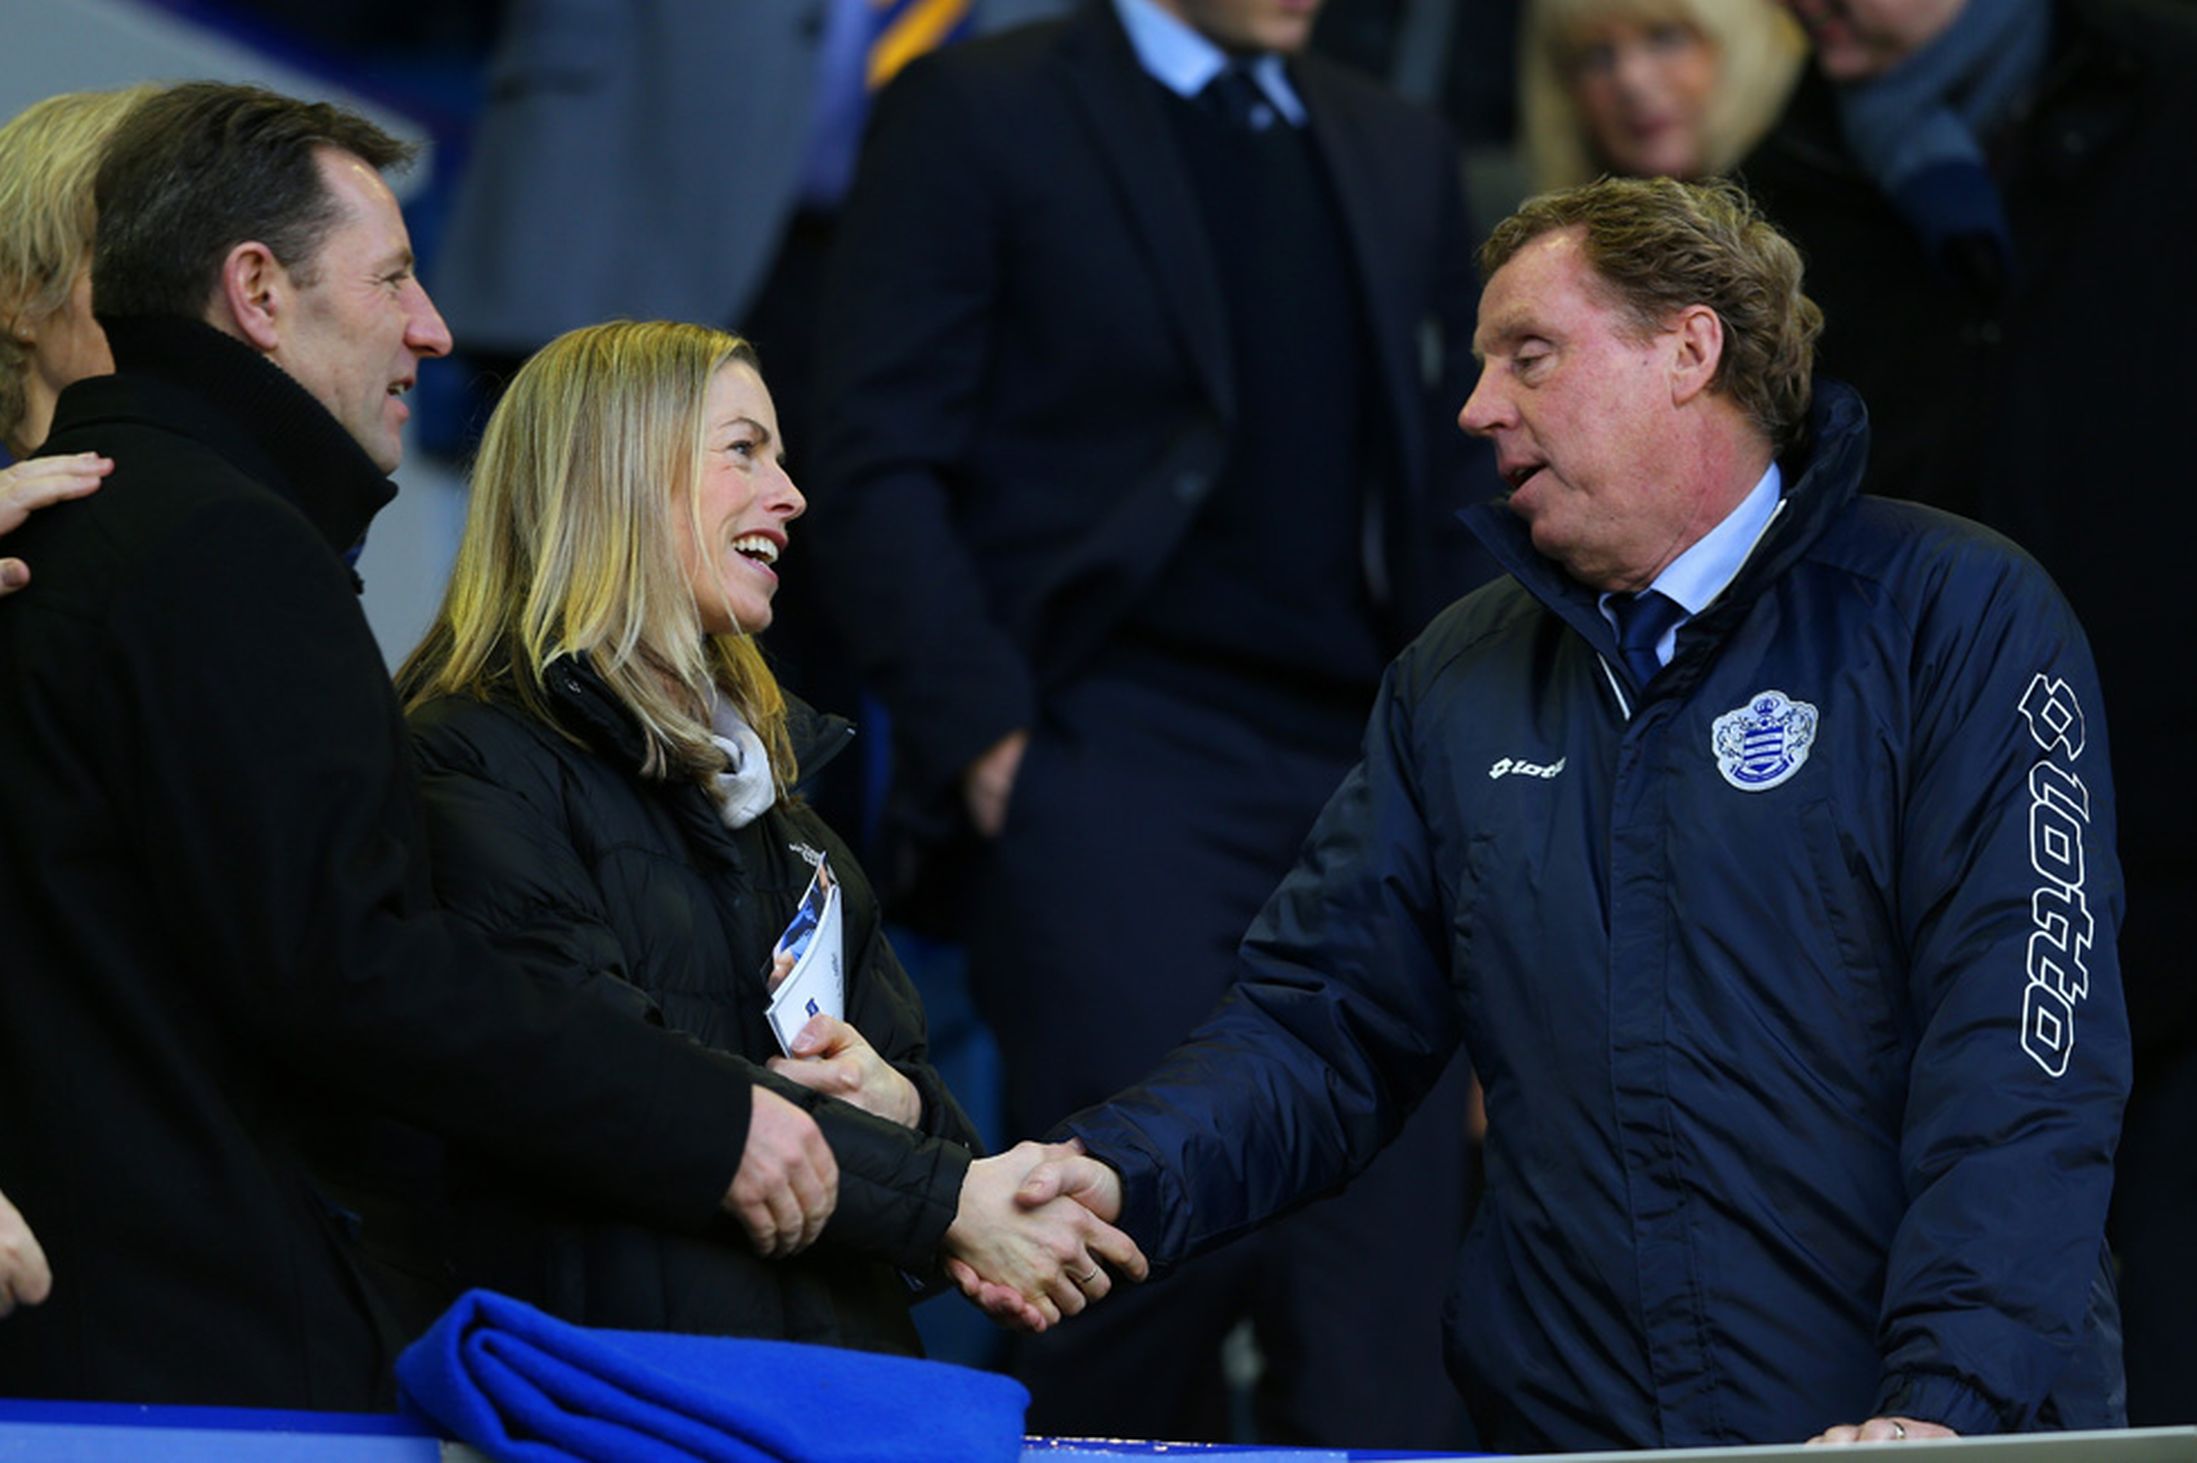 Meeting: The McCanns were pictured shaking the hand of Harry Redknapp, the manager of QPR